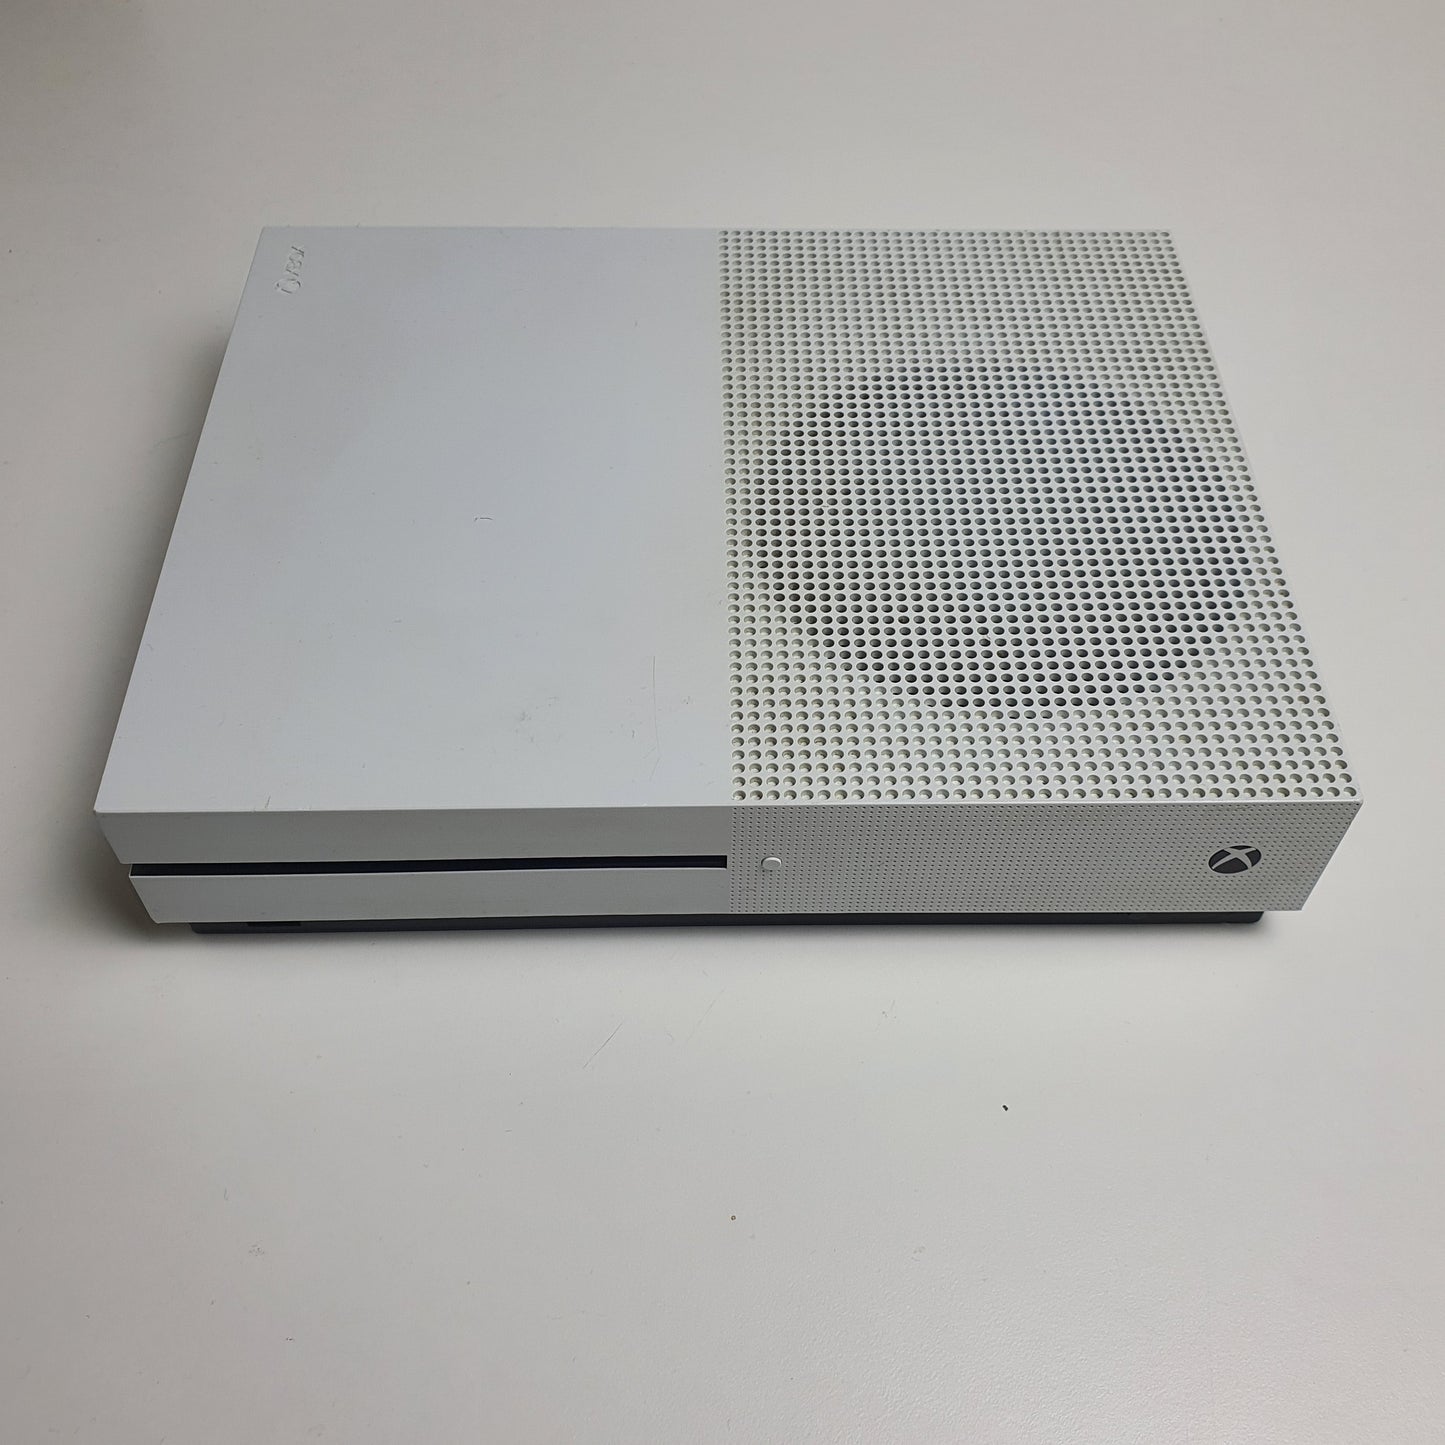 Microsoft Xbox One S 500GB White Disk Edition Bundle - Inc. Console, Controller and Cables